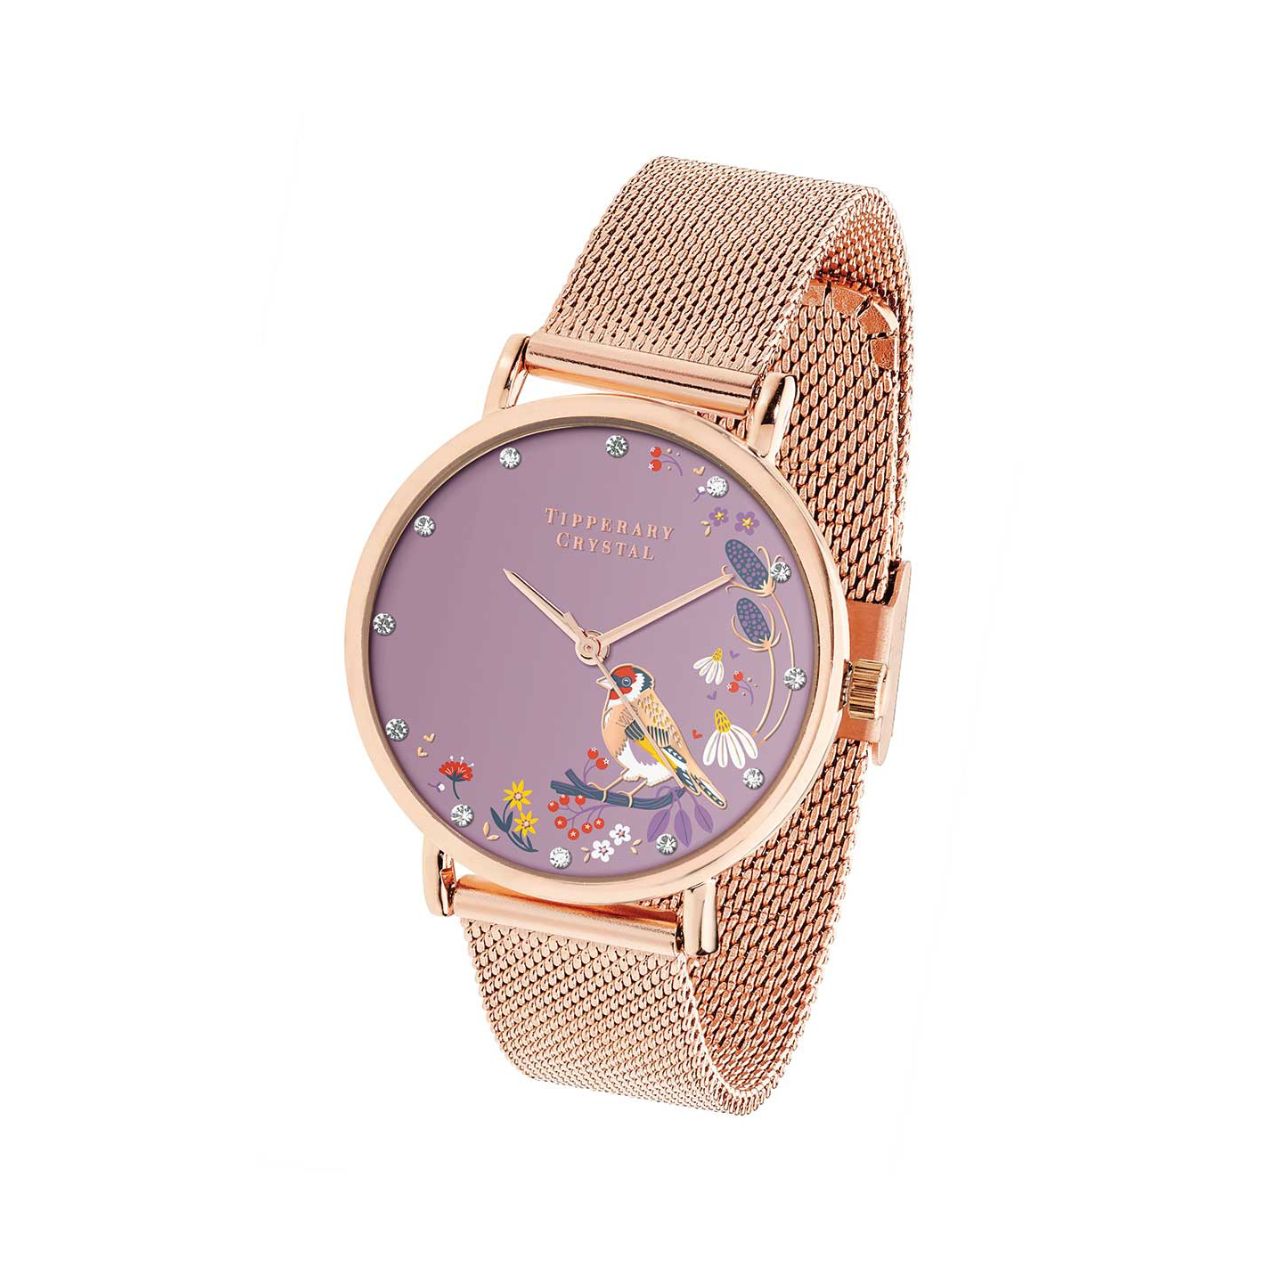 Goldfinch Rose Gold Birdy Watch by Tipperary  The Birdy Collection is a vibrant collection of rose gold watches showcasing the Birdy designs. The watches feature an array of Irish garden birds in an enchanted garden setting, embellished with rose gold detailing and crystal insets.